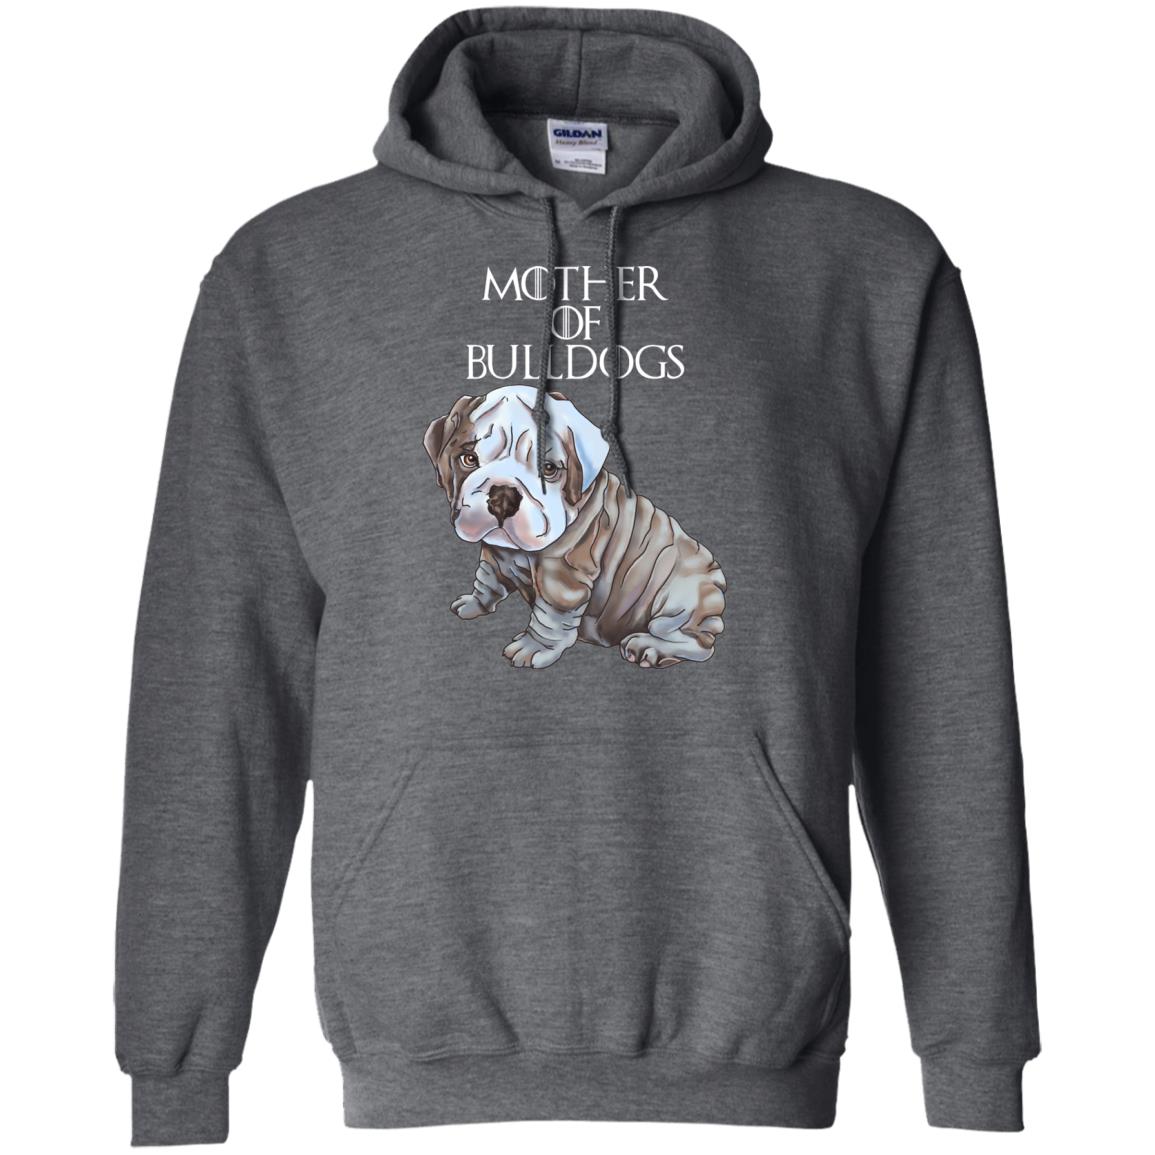 English bulldog Hoodie For Women - Mother of Bulldogs - GoneBold.gift